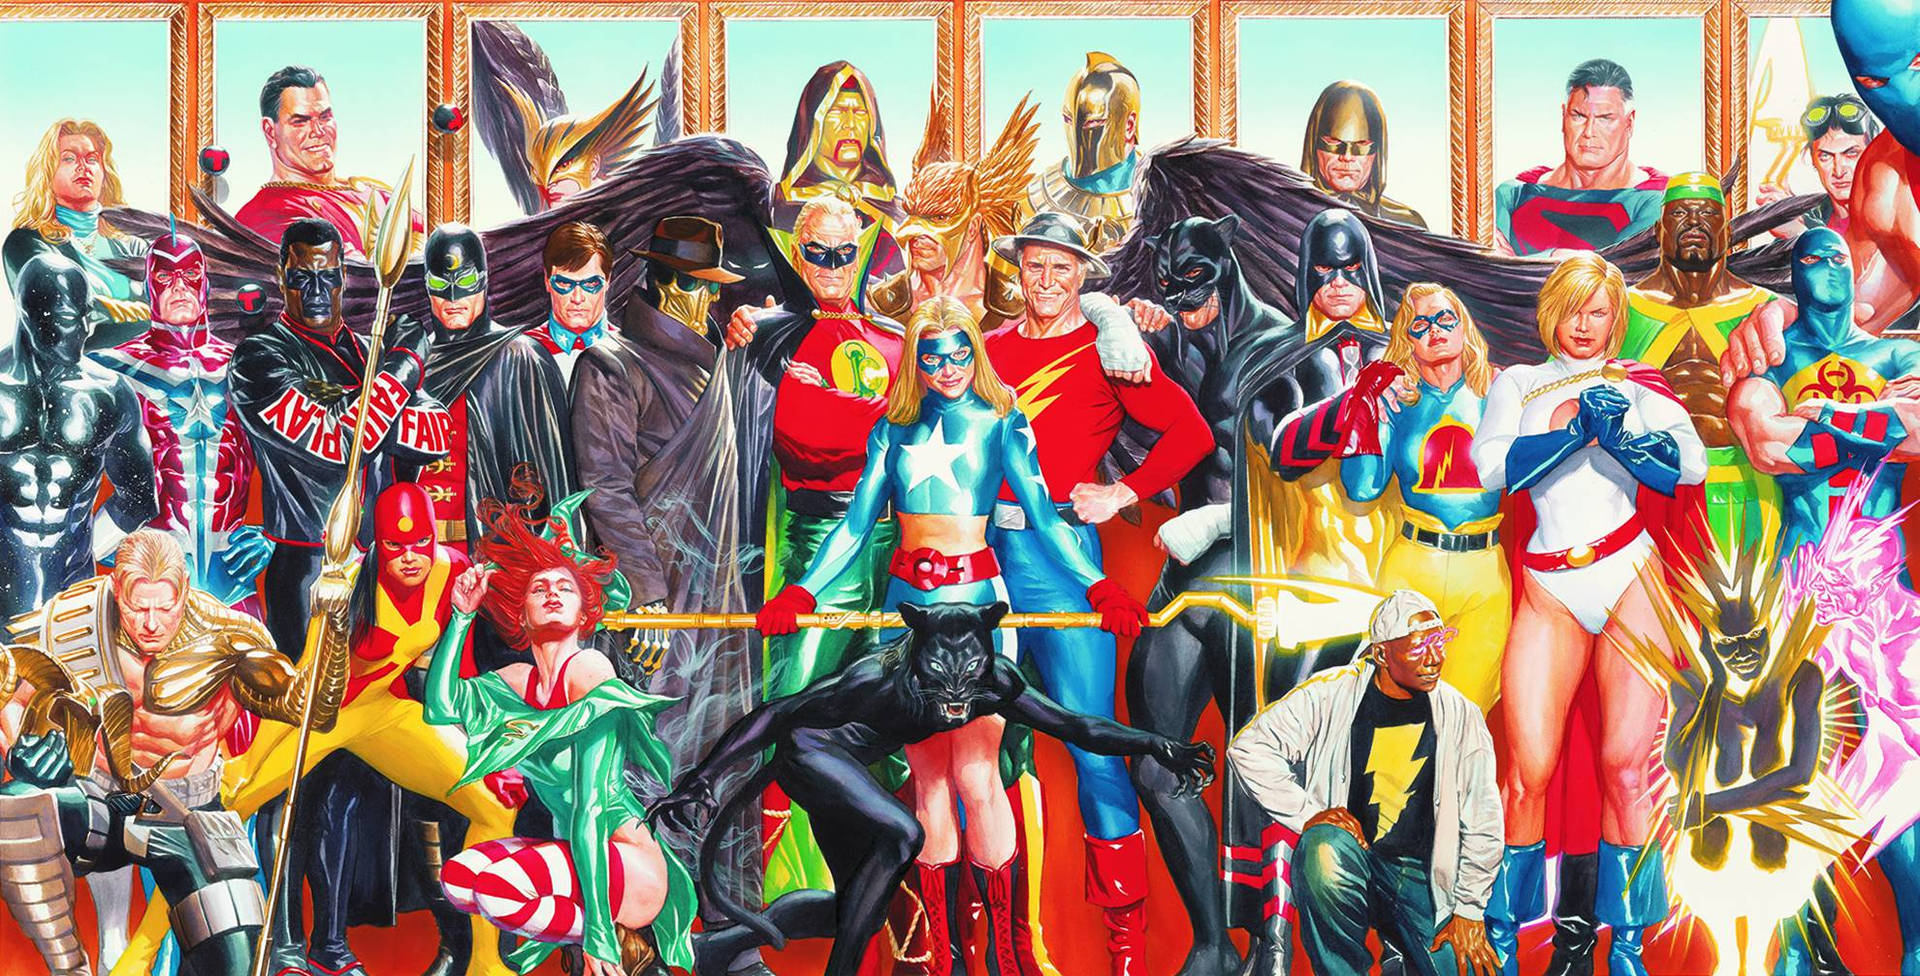 Justits Society of America Gruppe Foto Udseende Tapet: Se gruppefoto af Justice Society of America. Wallpaper